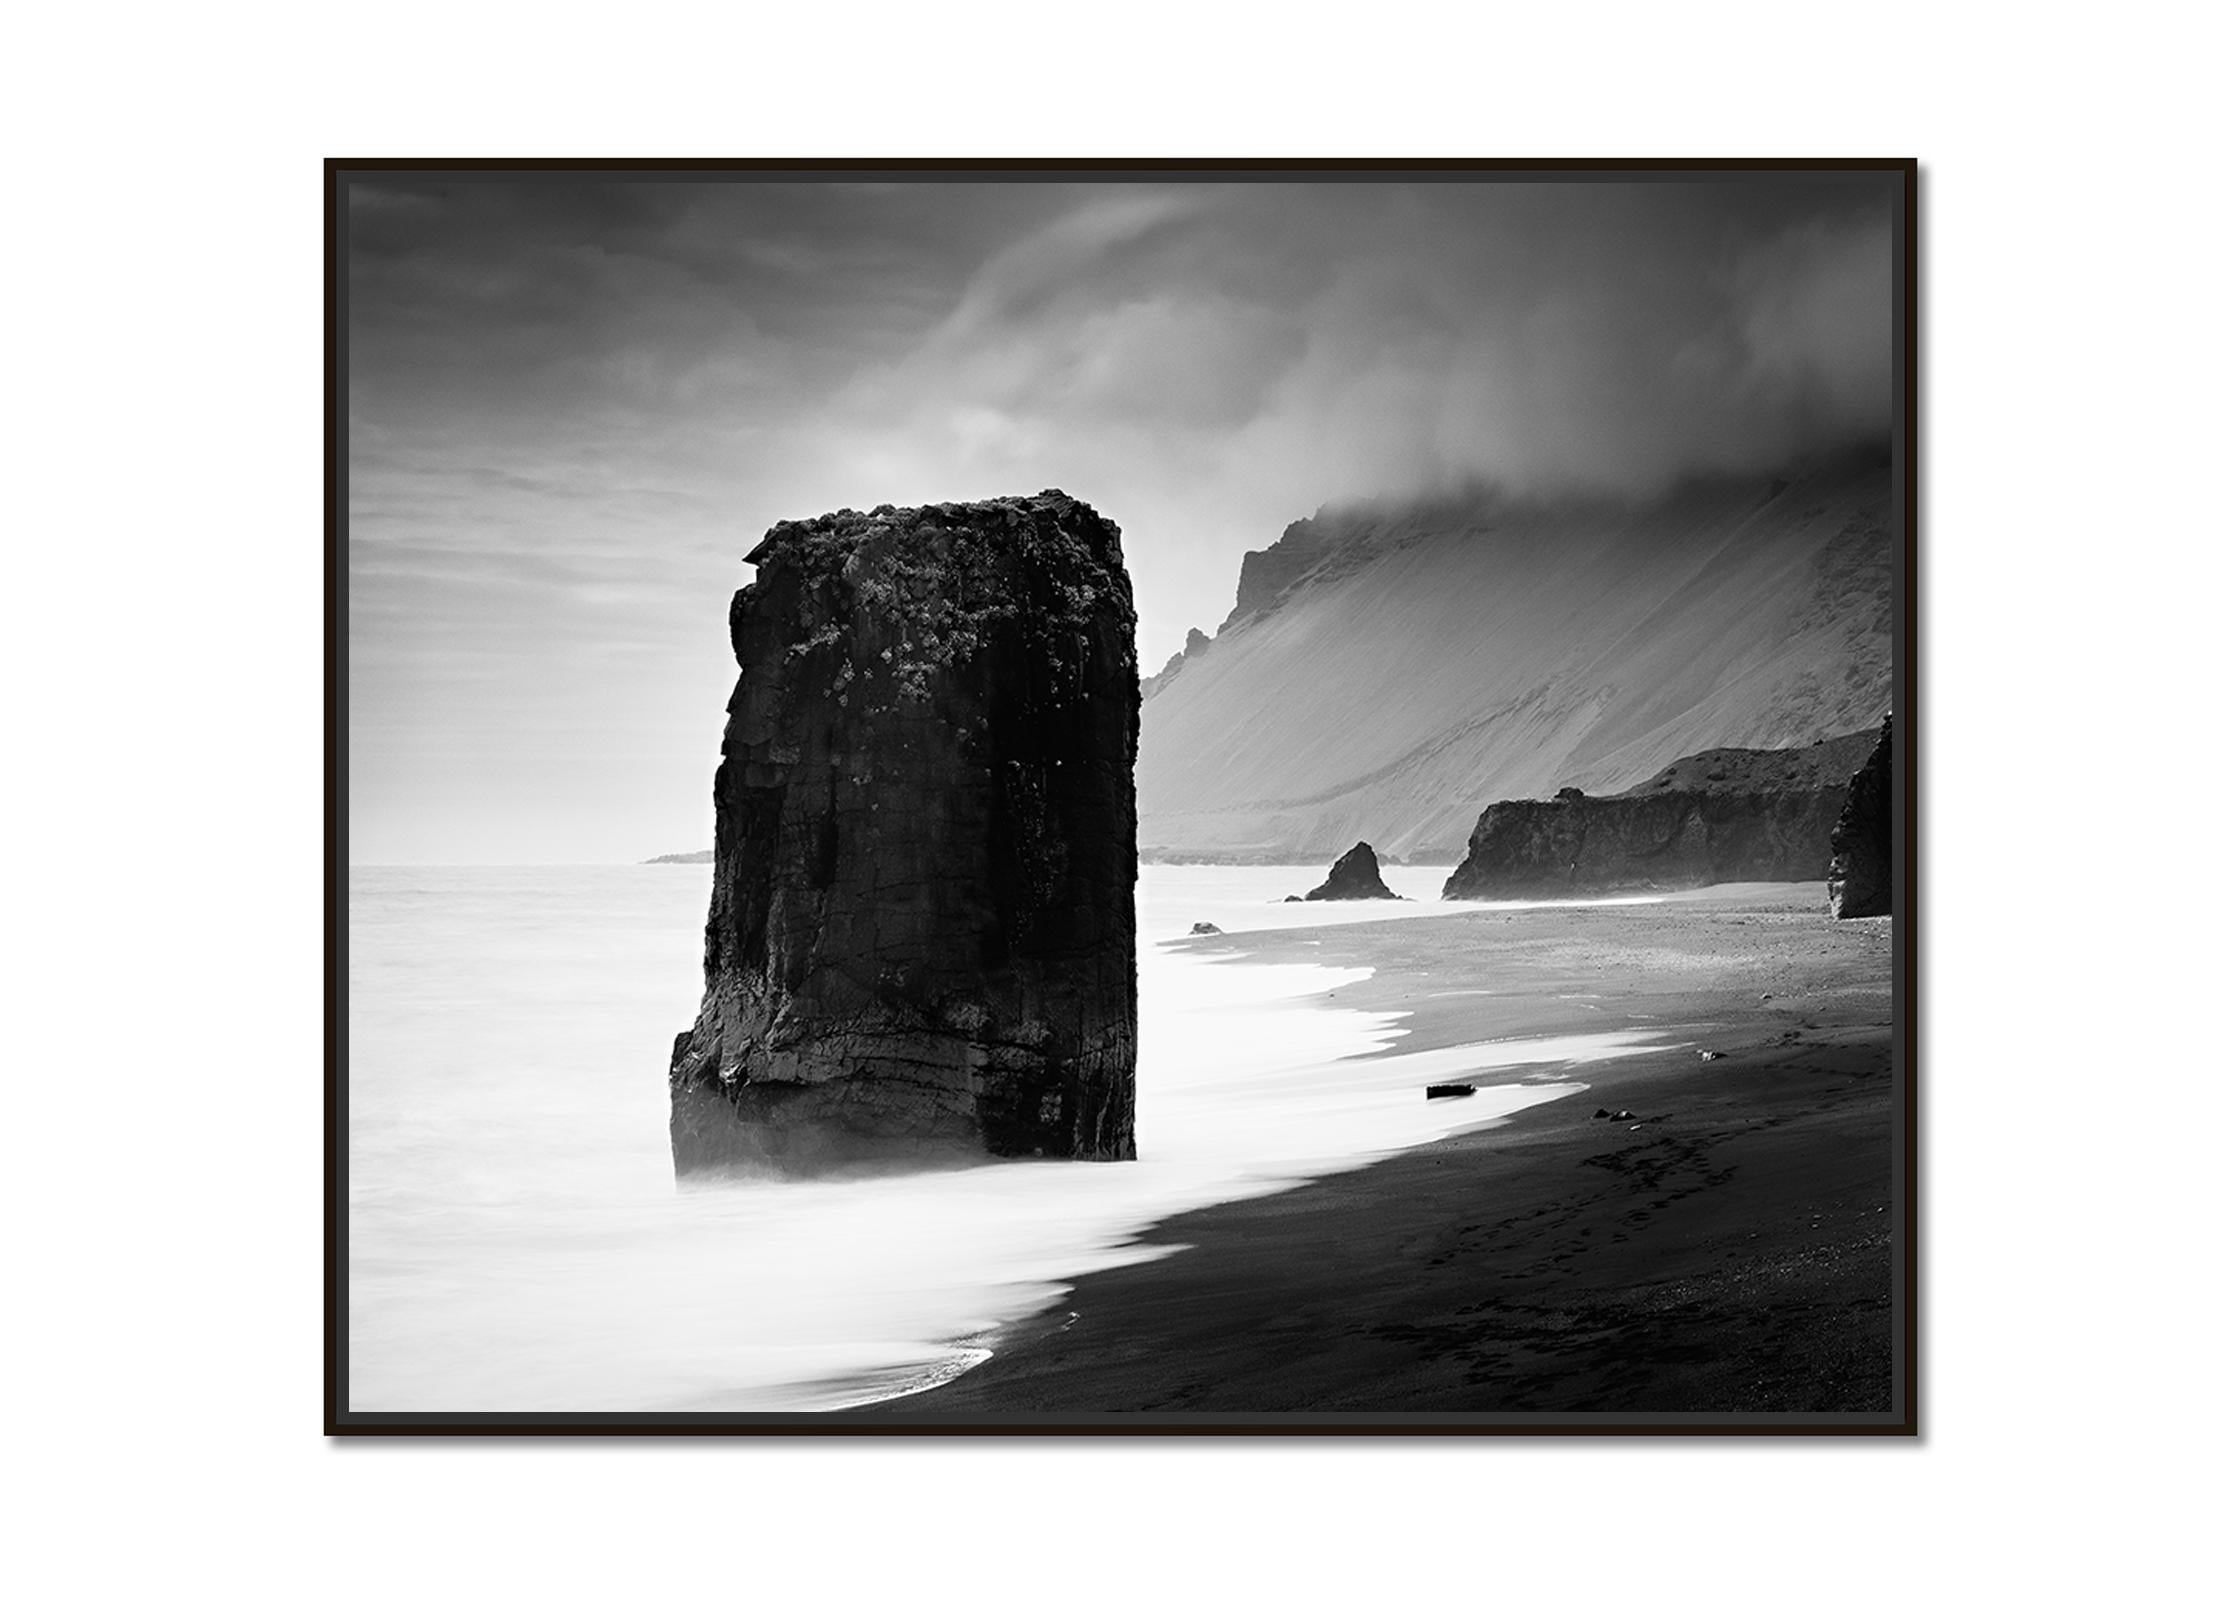 Flooded Rock, Black Beach, Iceland, black and white photography, landscape, art - Photograph by Gerald Berghammer